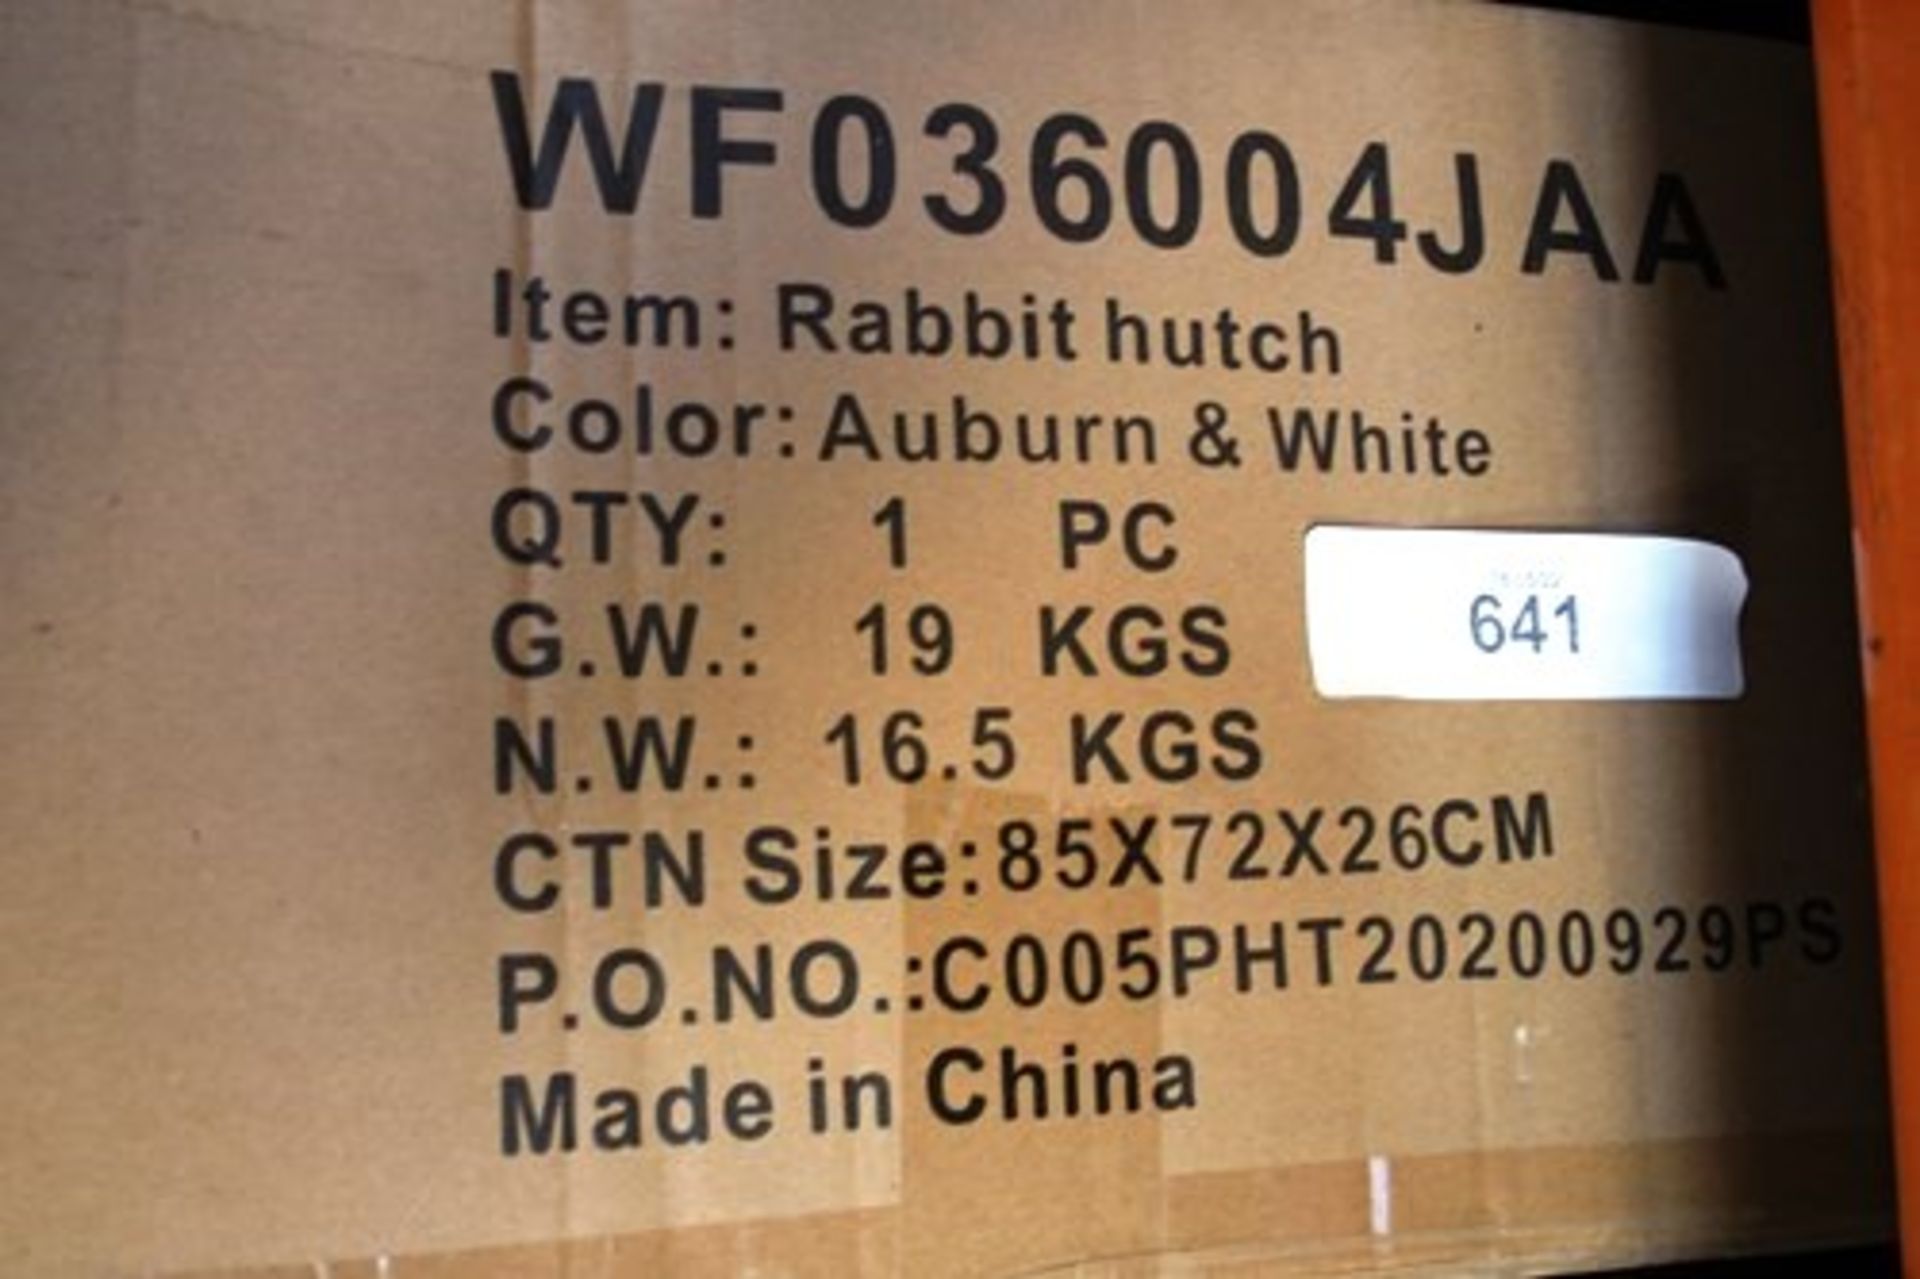 1 x unbranded auburn and white rabbit hutch, code WF03600 4JAA - New in box (Gs16) - Image 2 of 2